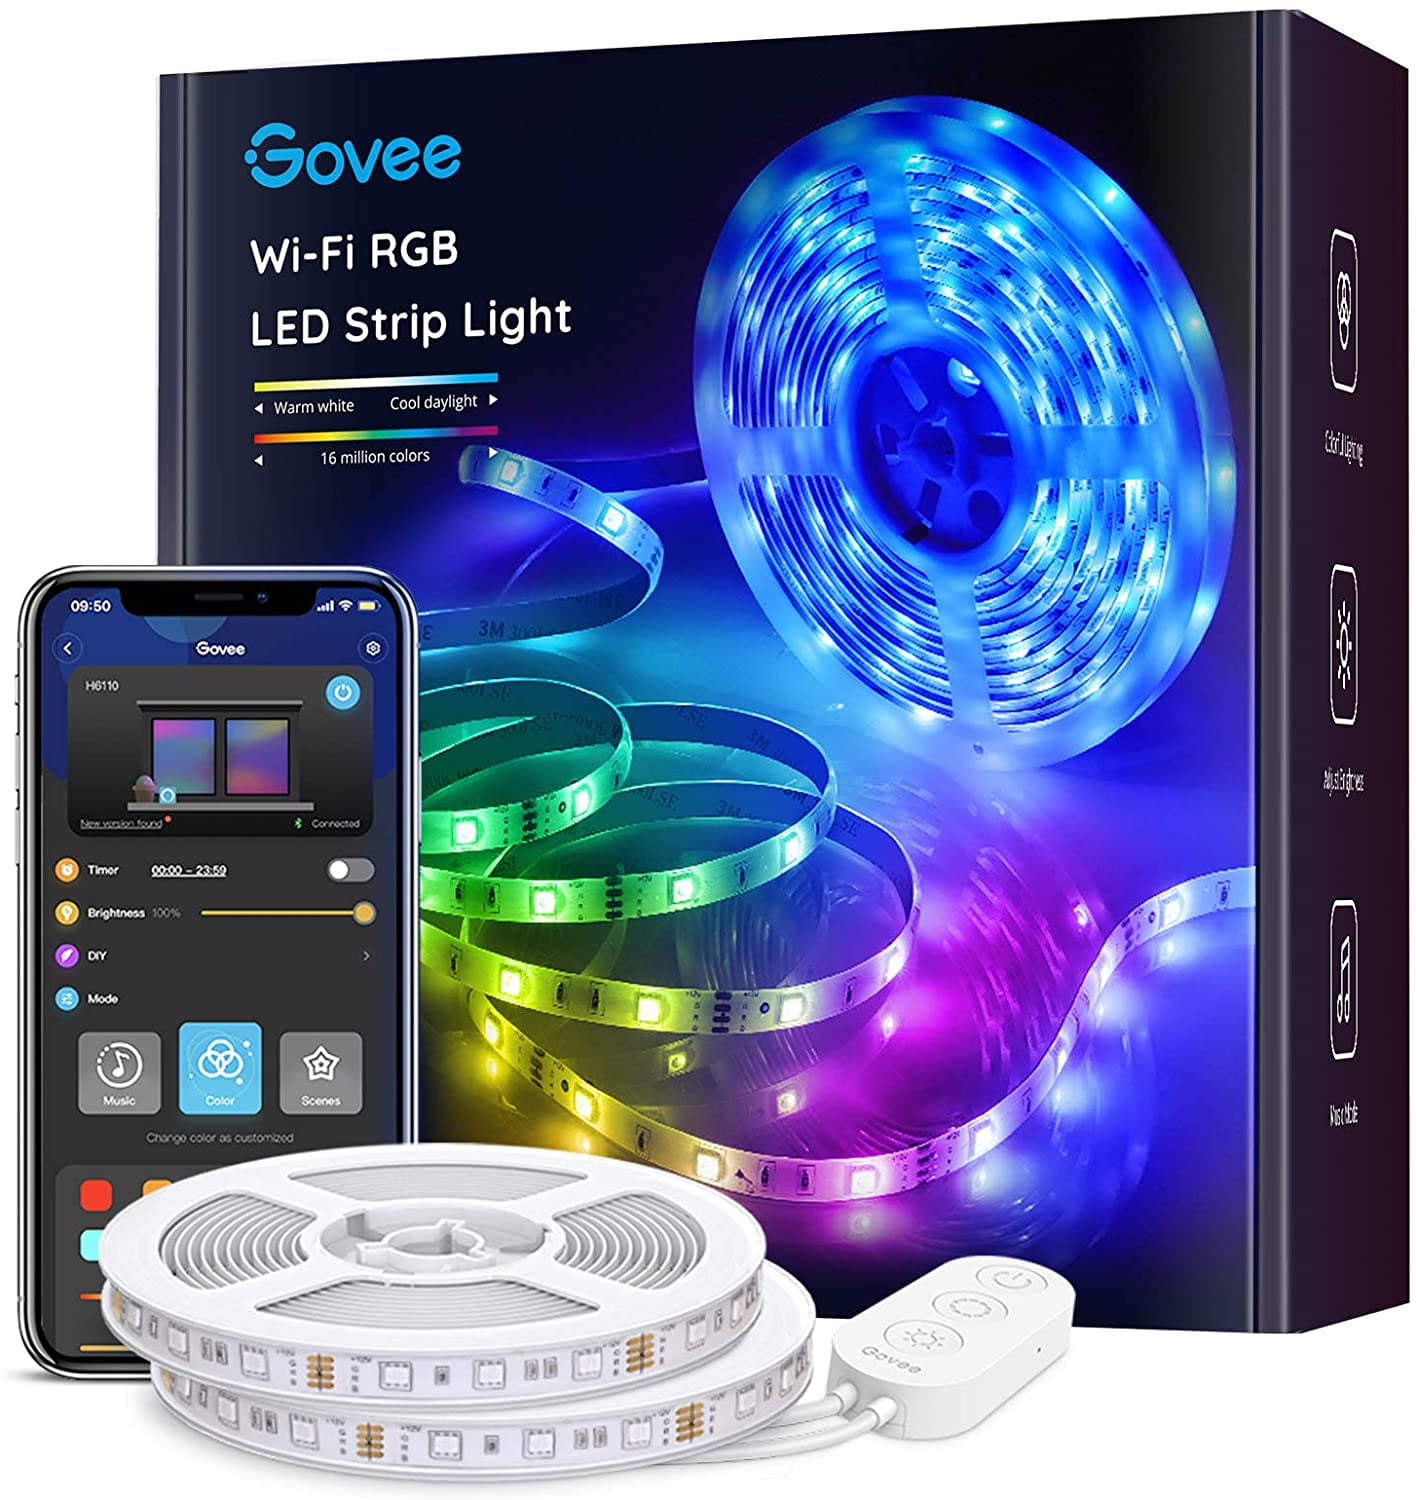 Govee Smart LED Strip Lights, 32.8ft WiFi LED Lights Work with Alexa and  Google Assistant, Bright 5050 LEDs, 16 Million Colors with App Control and  Music Sync for Home, Kitchen, TV, Party 